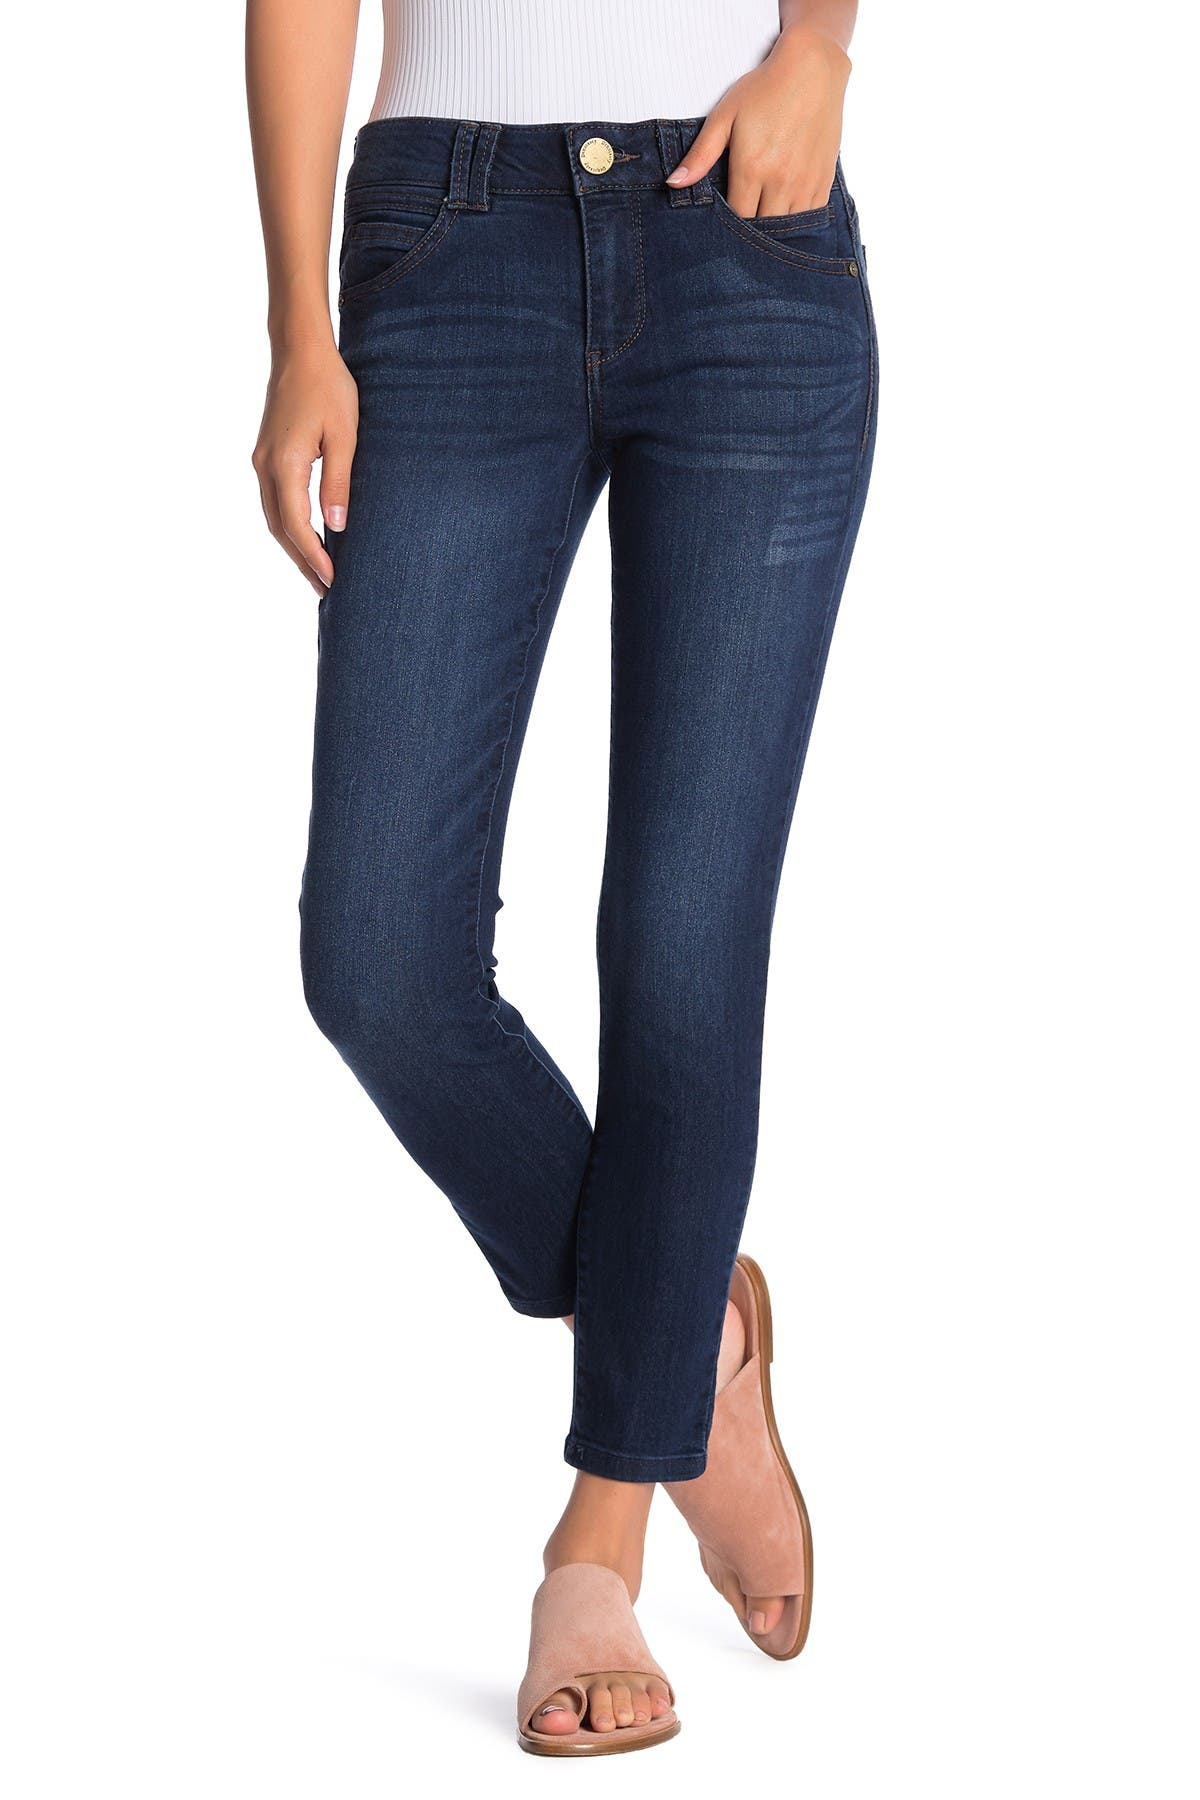 abercrombie ultra high rise jeans